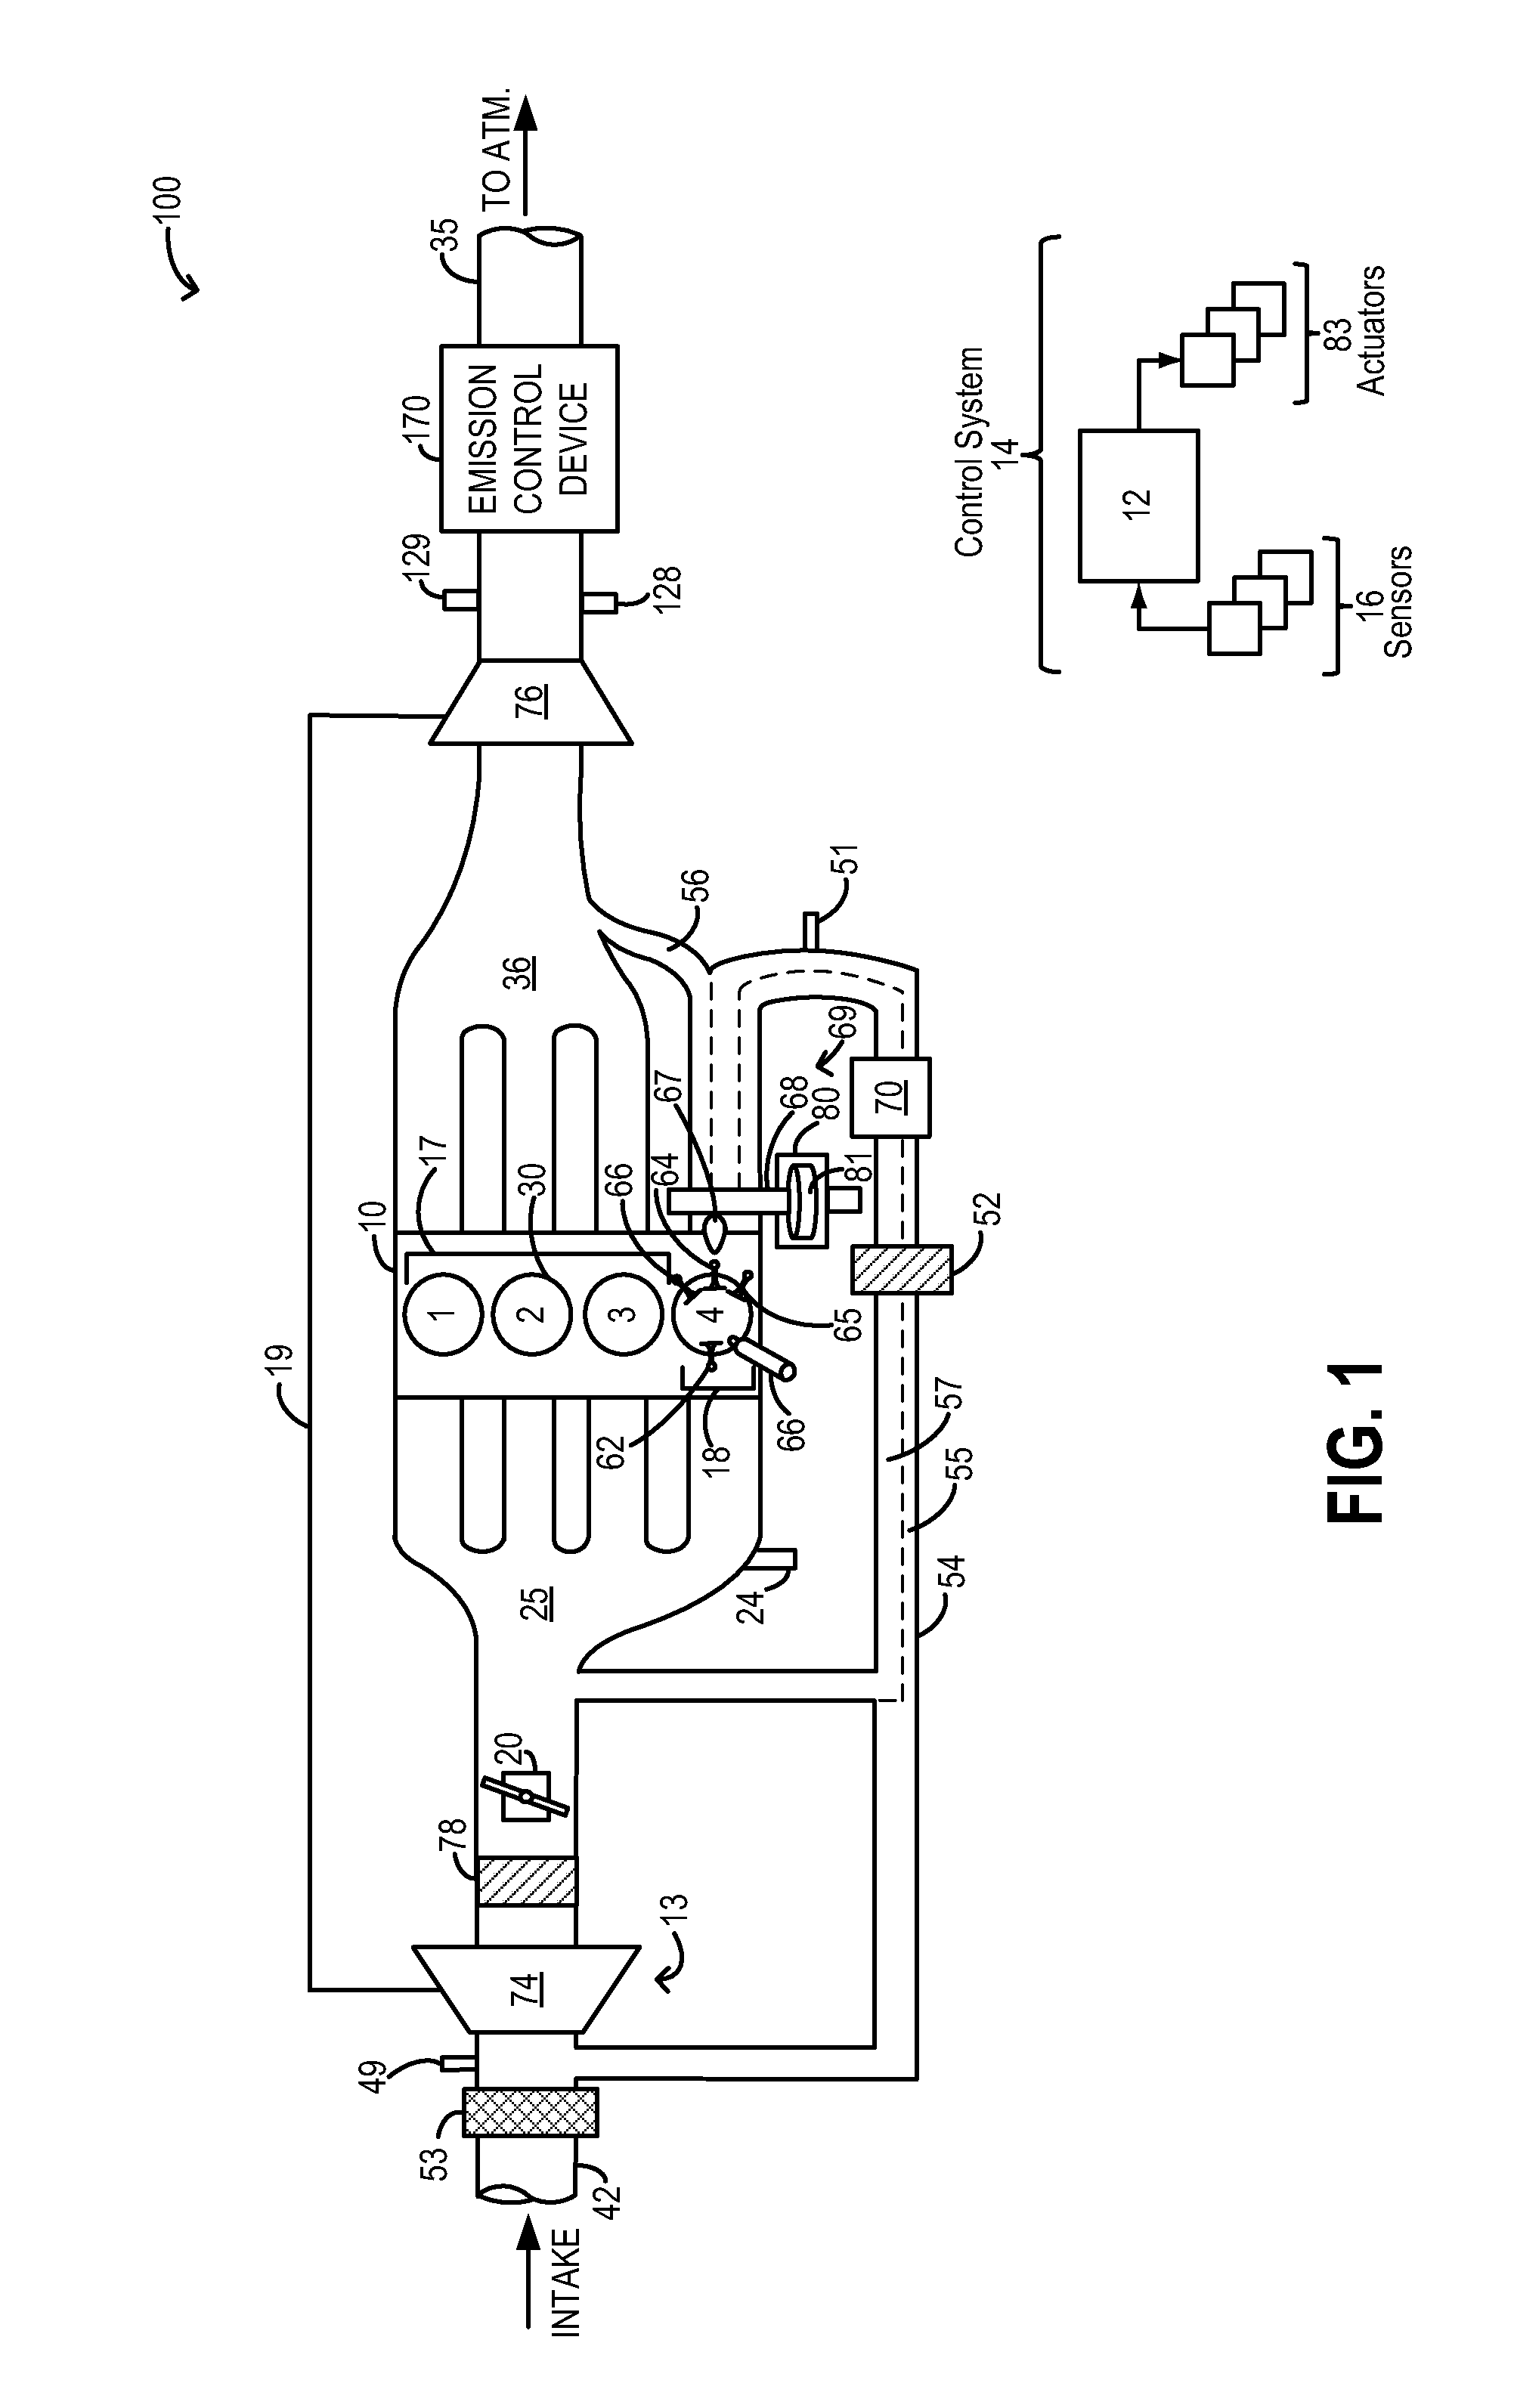 Systems and methods for egr control